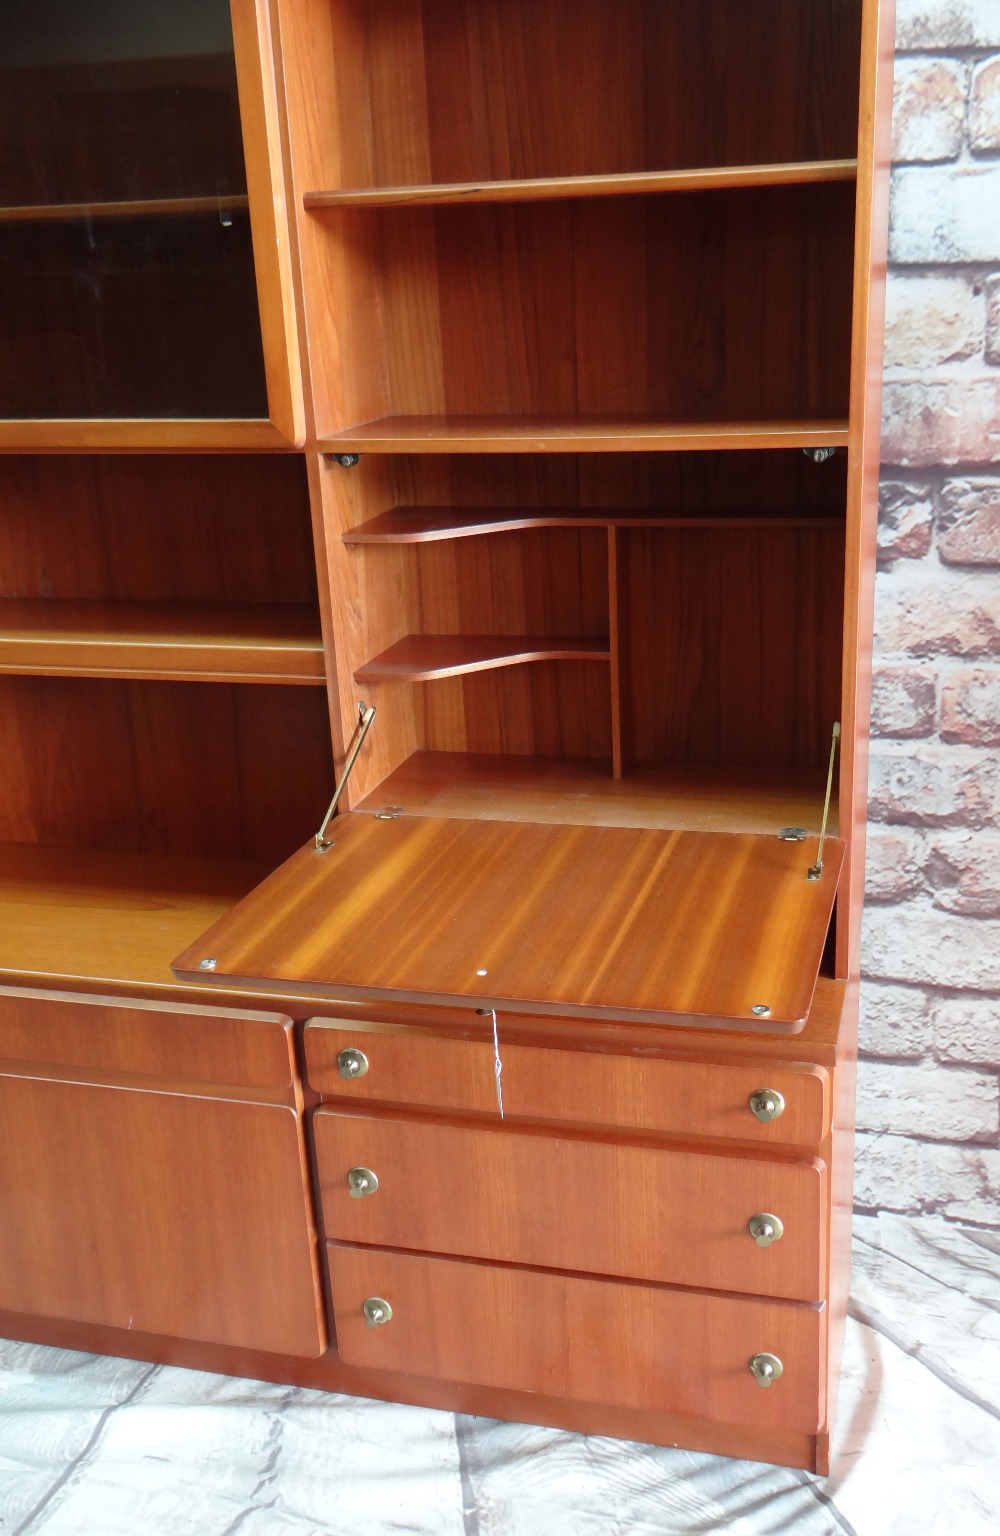 VINTAGE A. H. McINTOSH & Co. TEAK LOUNGE CABINET, fitted with shelves, cupboards, glass doors and - Image 2 of 2